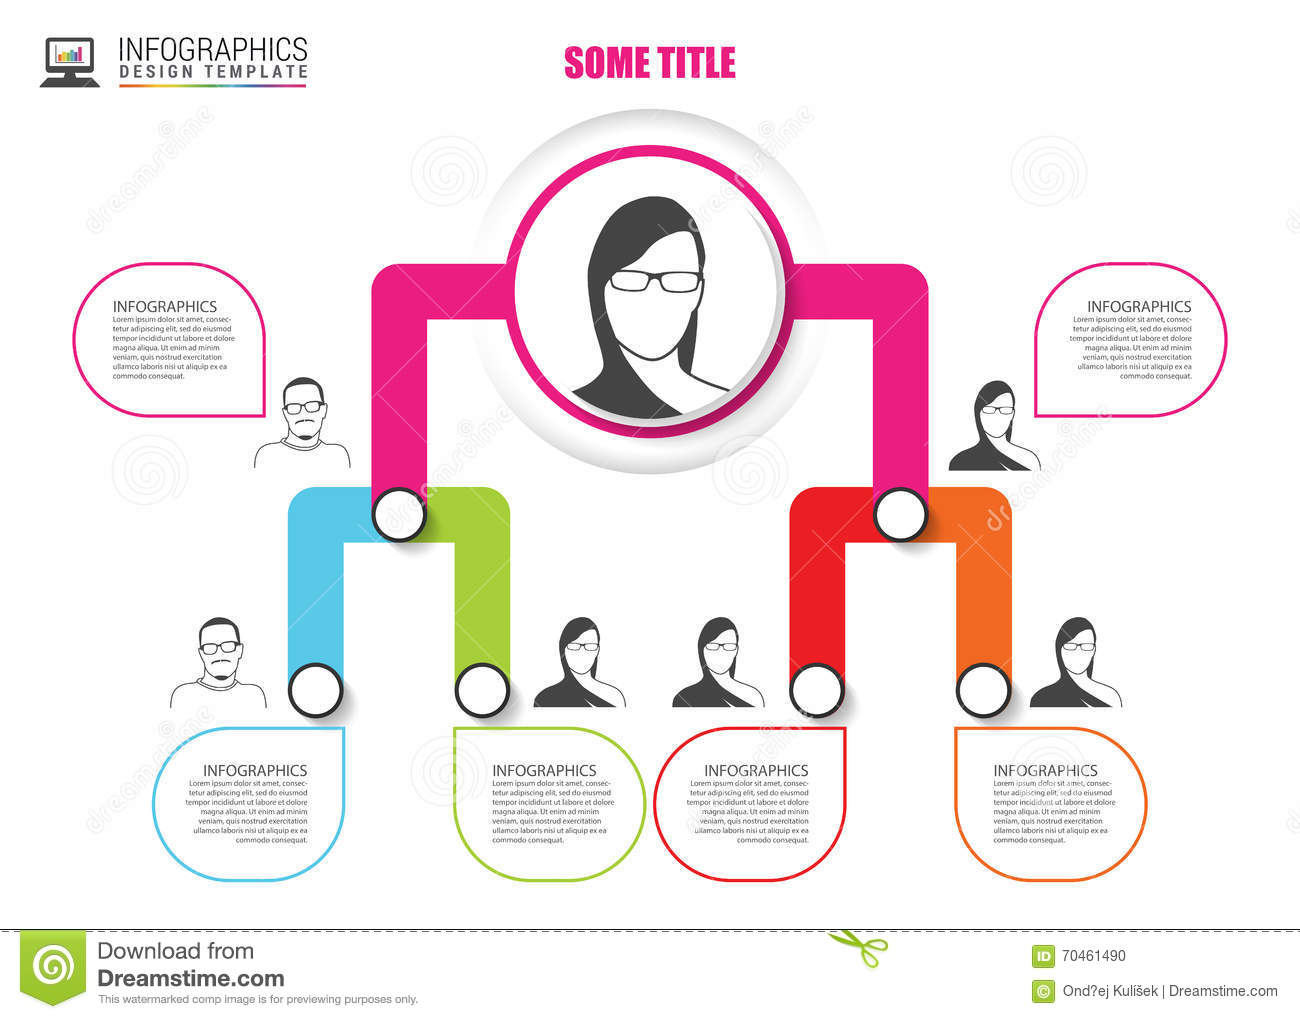 Organizational Chart Infographic by macrovector | GraphicRiver